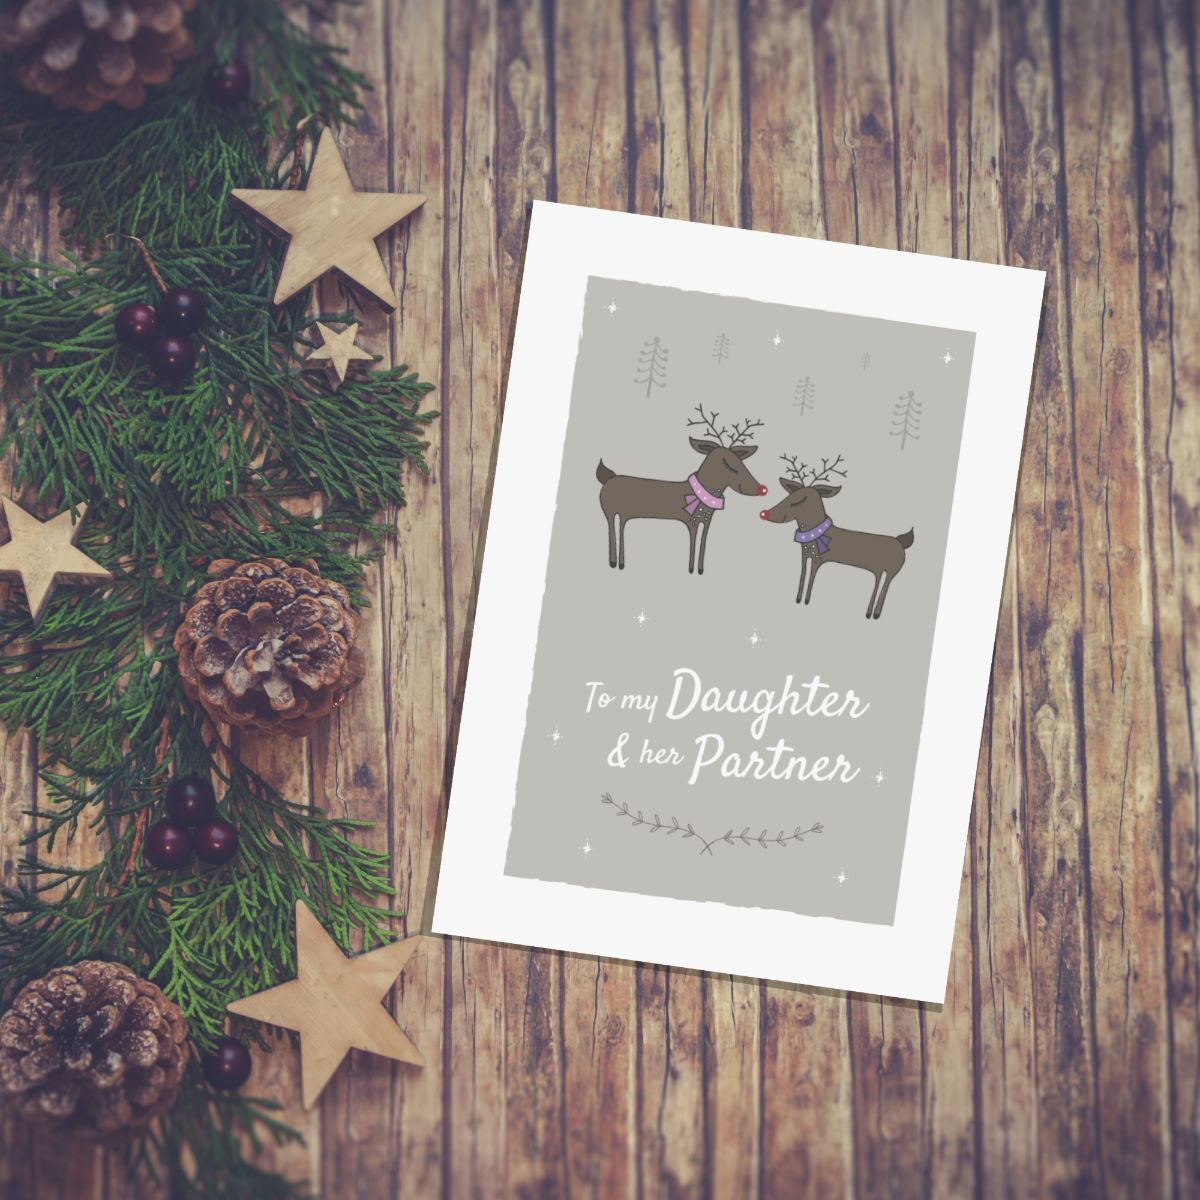 To my Lesbian Daughter and her Partner at Christmas Card